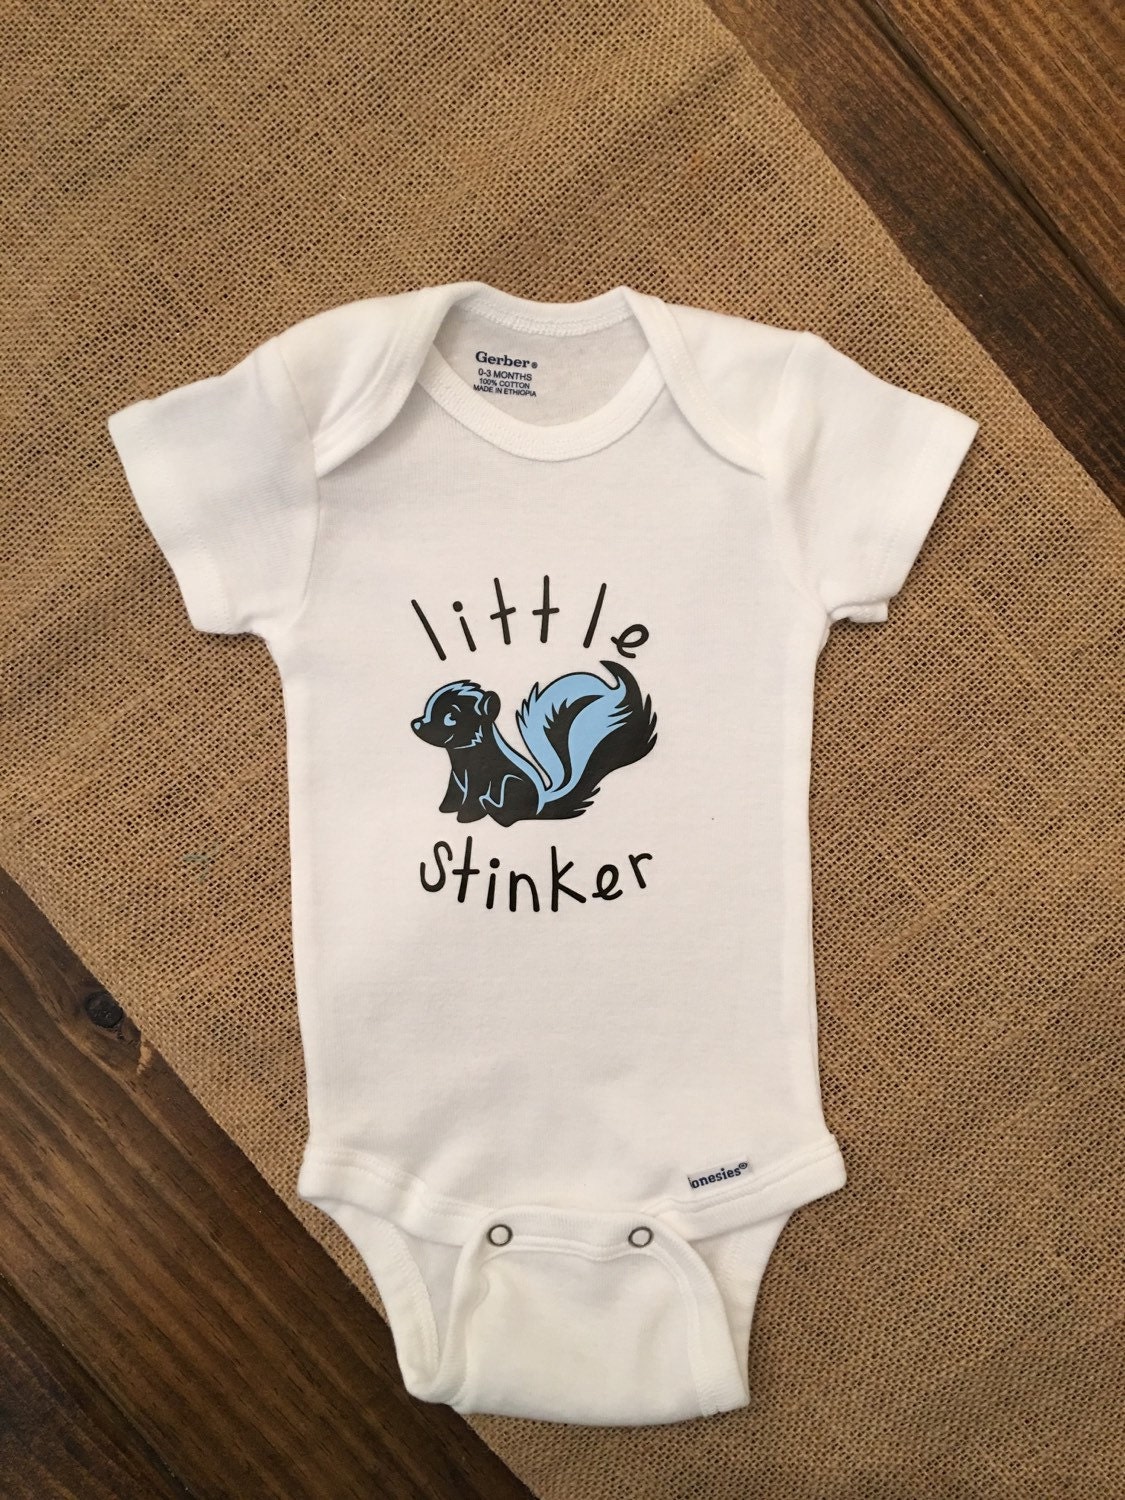 Little Stinker Baby Onesie by lilsouthernaccents on Etsy